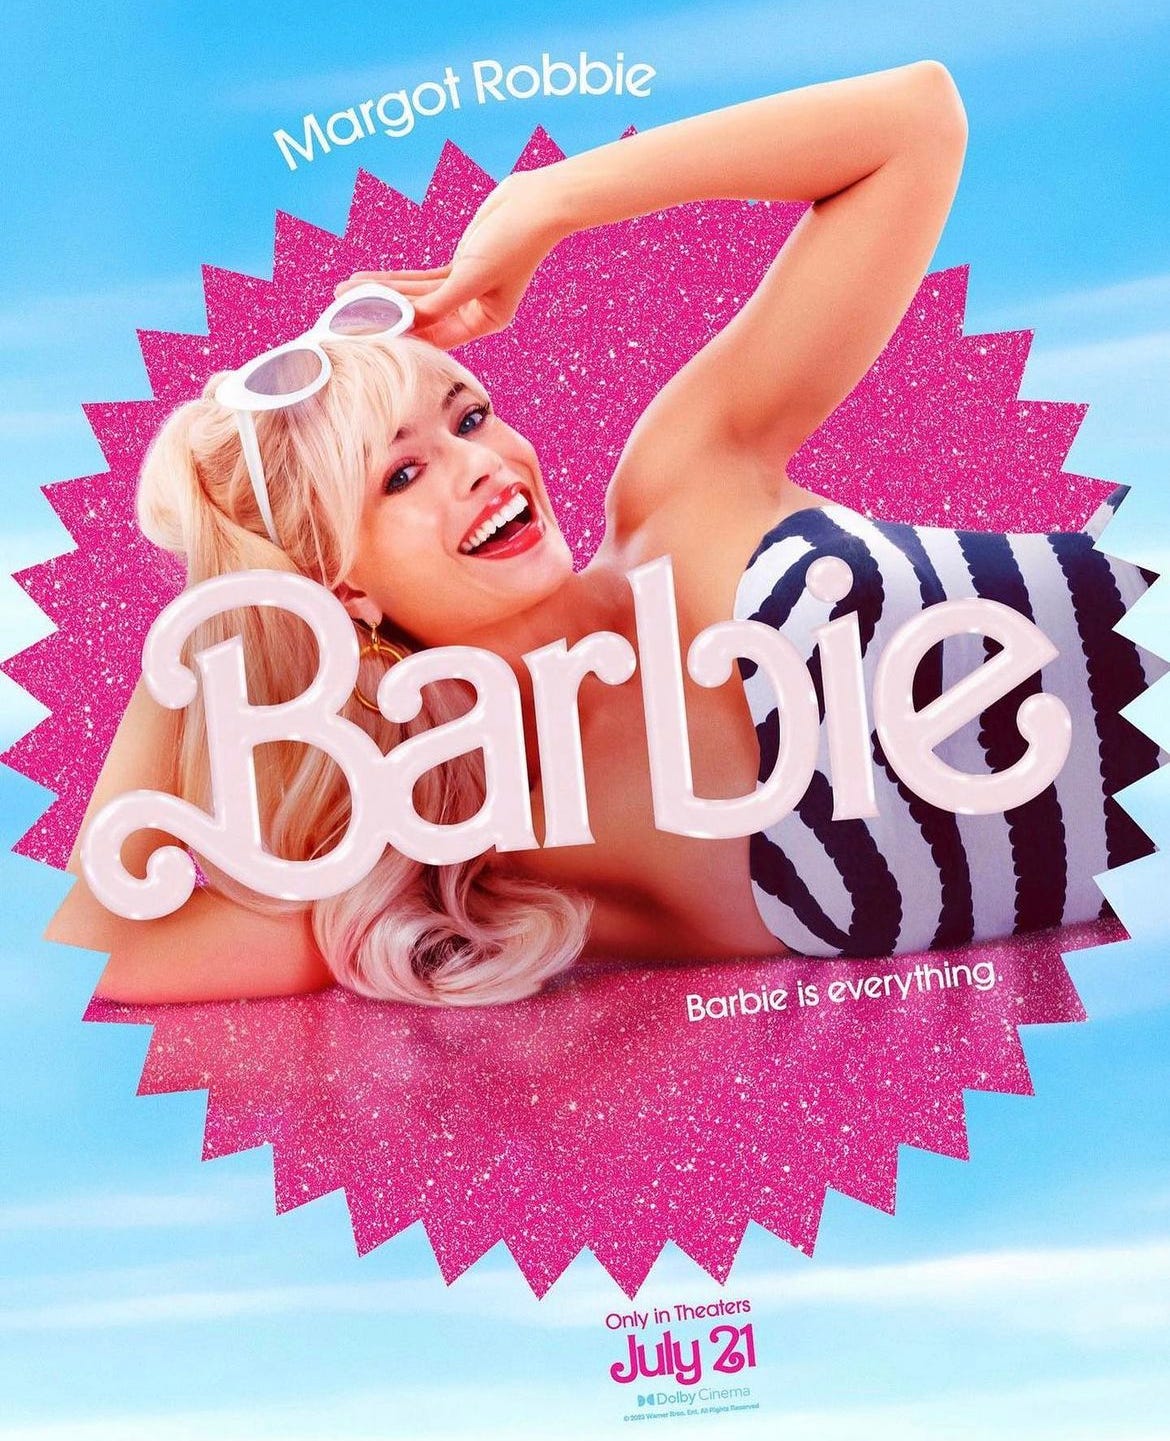 Margot Robbie poses for a Barbie Movie ad. She is lying on her side in a black and white striped swimsuit, and is smiling and raising her white sunglasses above her face. Text reads "Barbie is everything" and "Only in theaters on July 21"